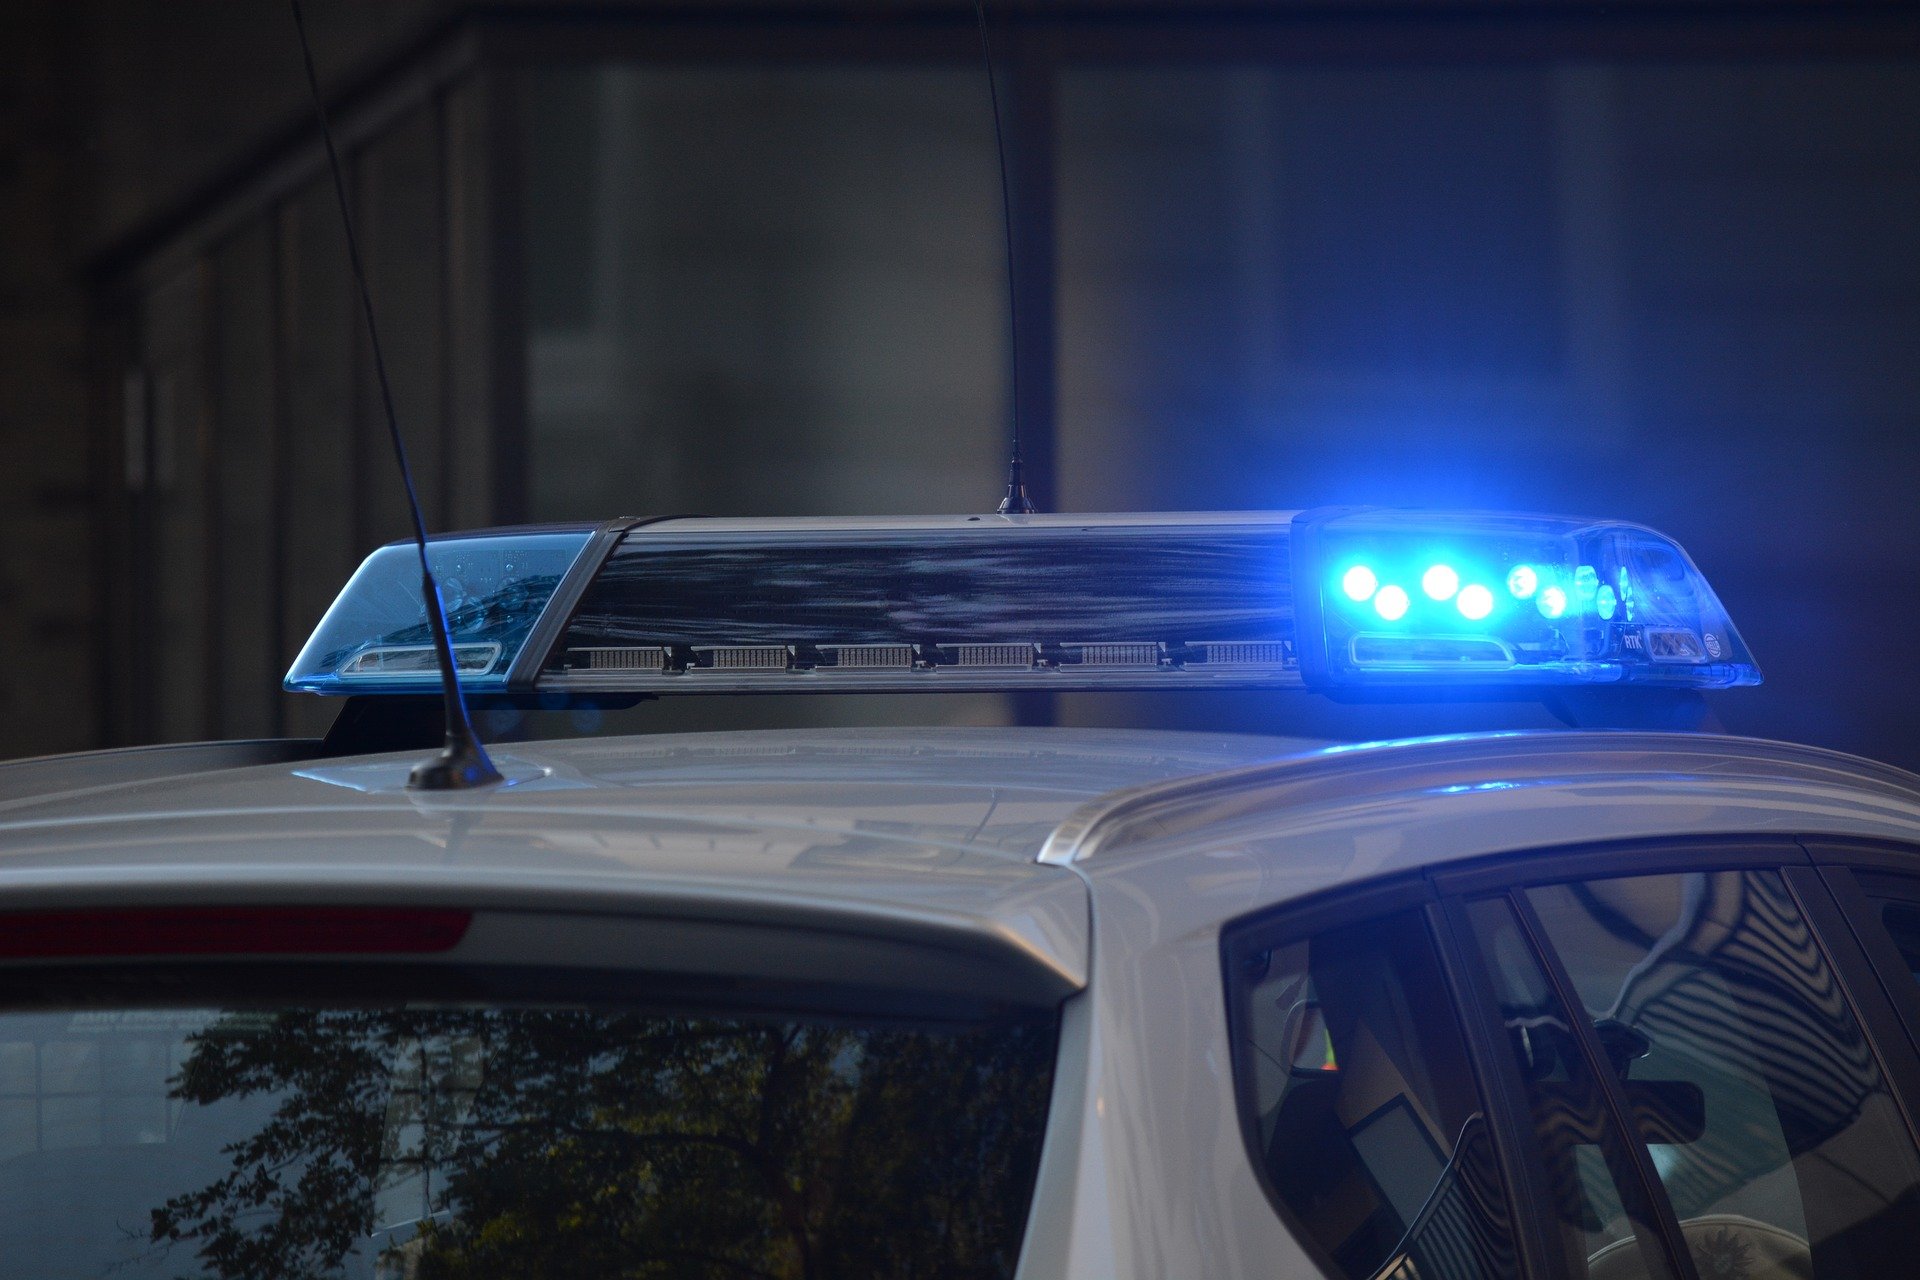 Pictured - Blue siren lights of a police vehicle | Source: Pixabay 